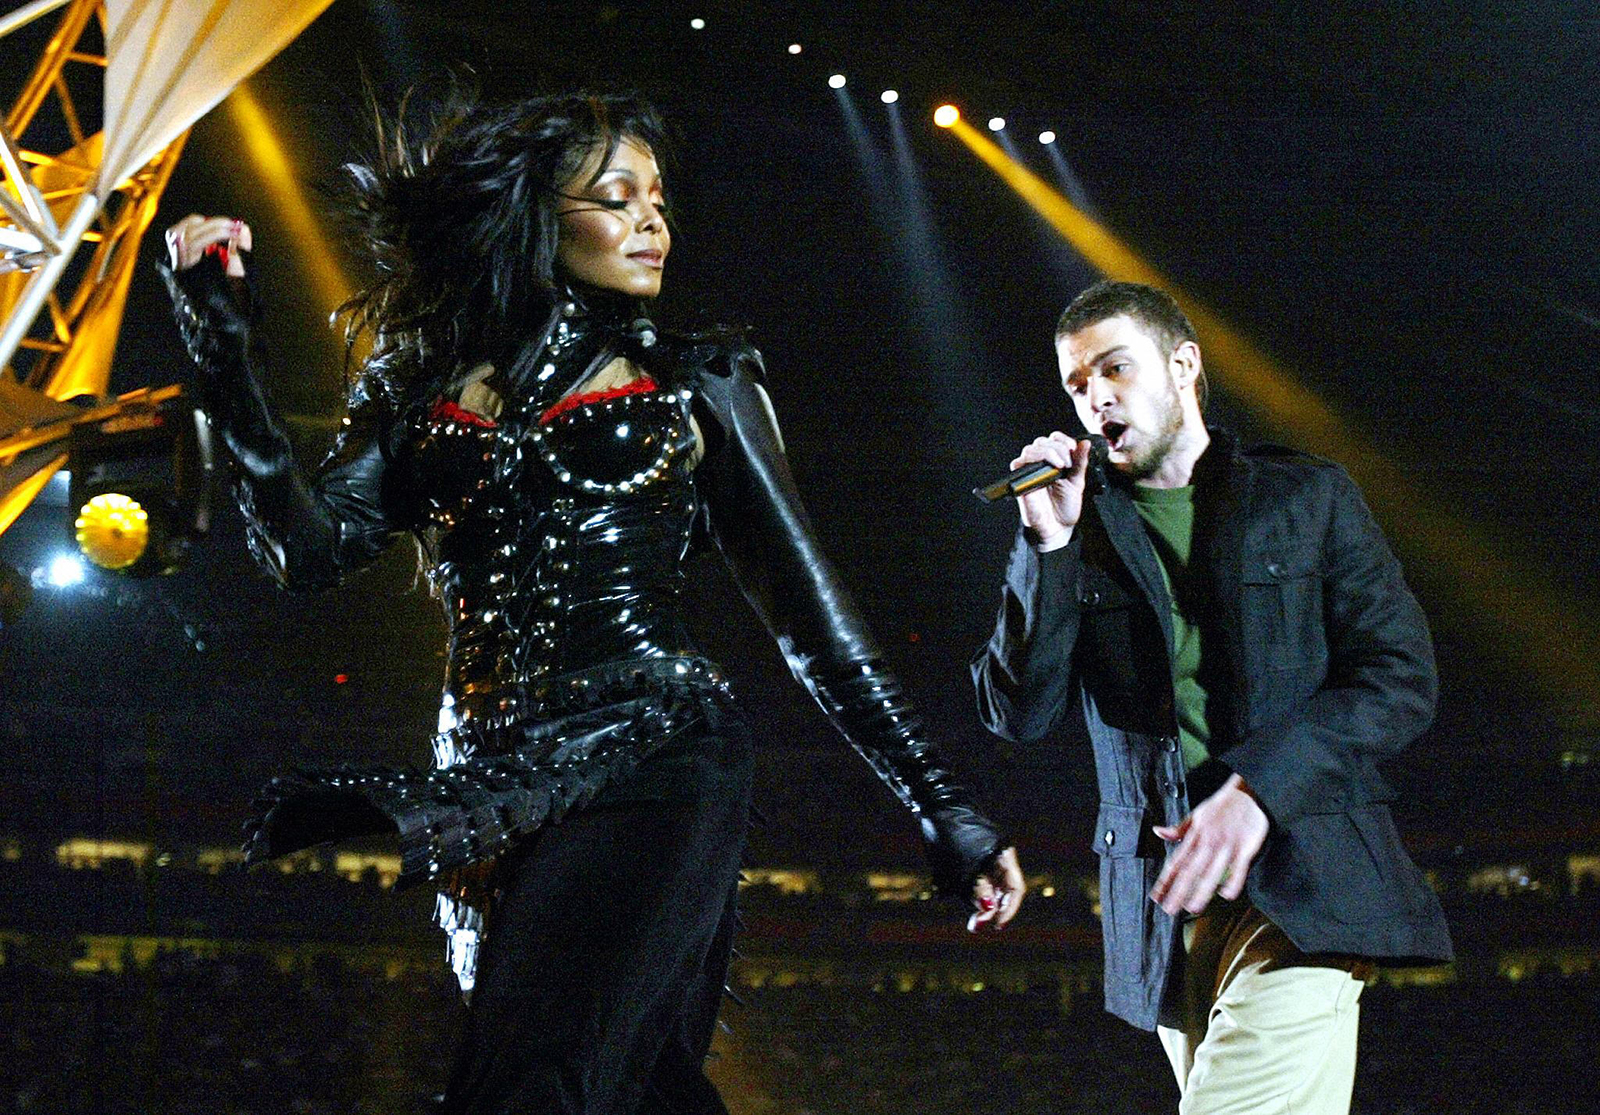 Janet Jackson and Justin Timberlake performed at the Super Bowl halftime show in 2004.